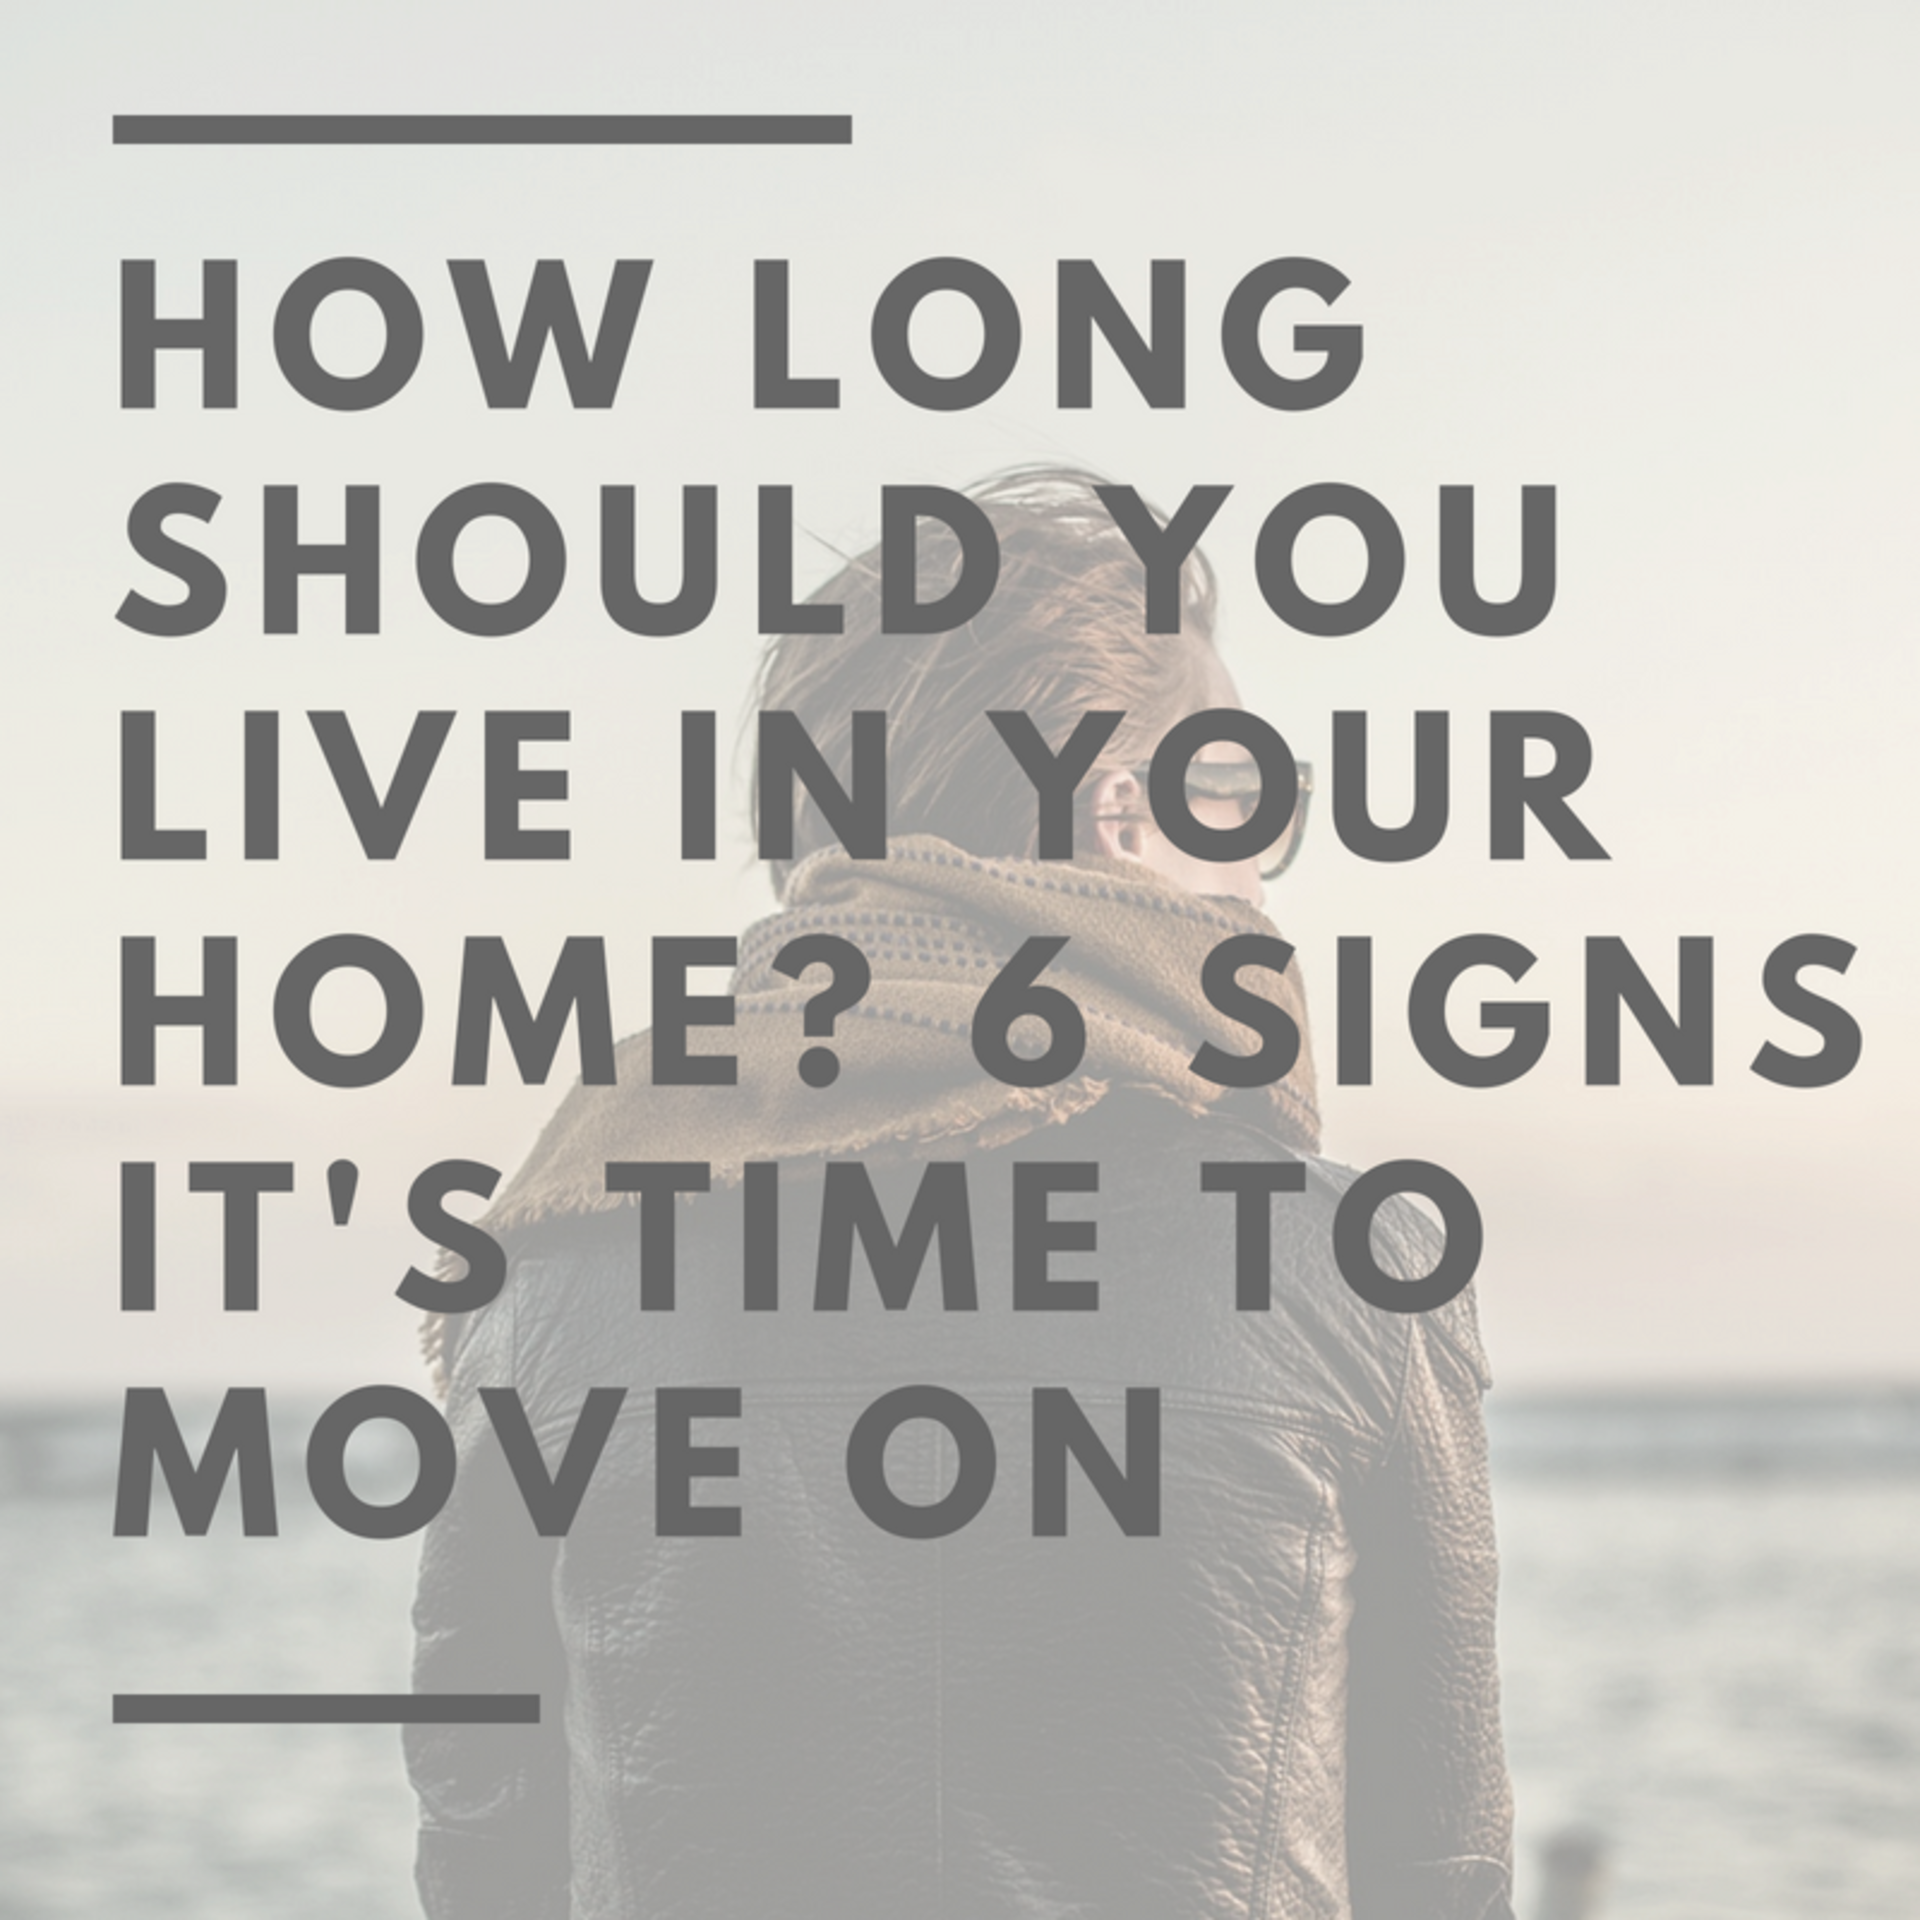 How Long Should You Live in Your Home? 6 Signs It&#8217;s Time to Move On